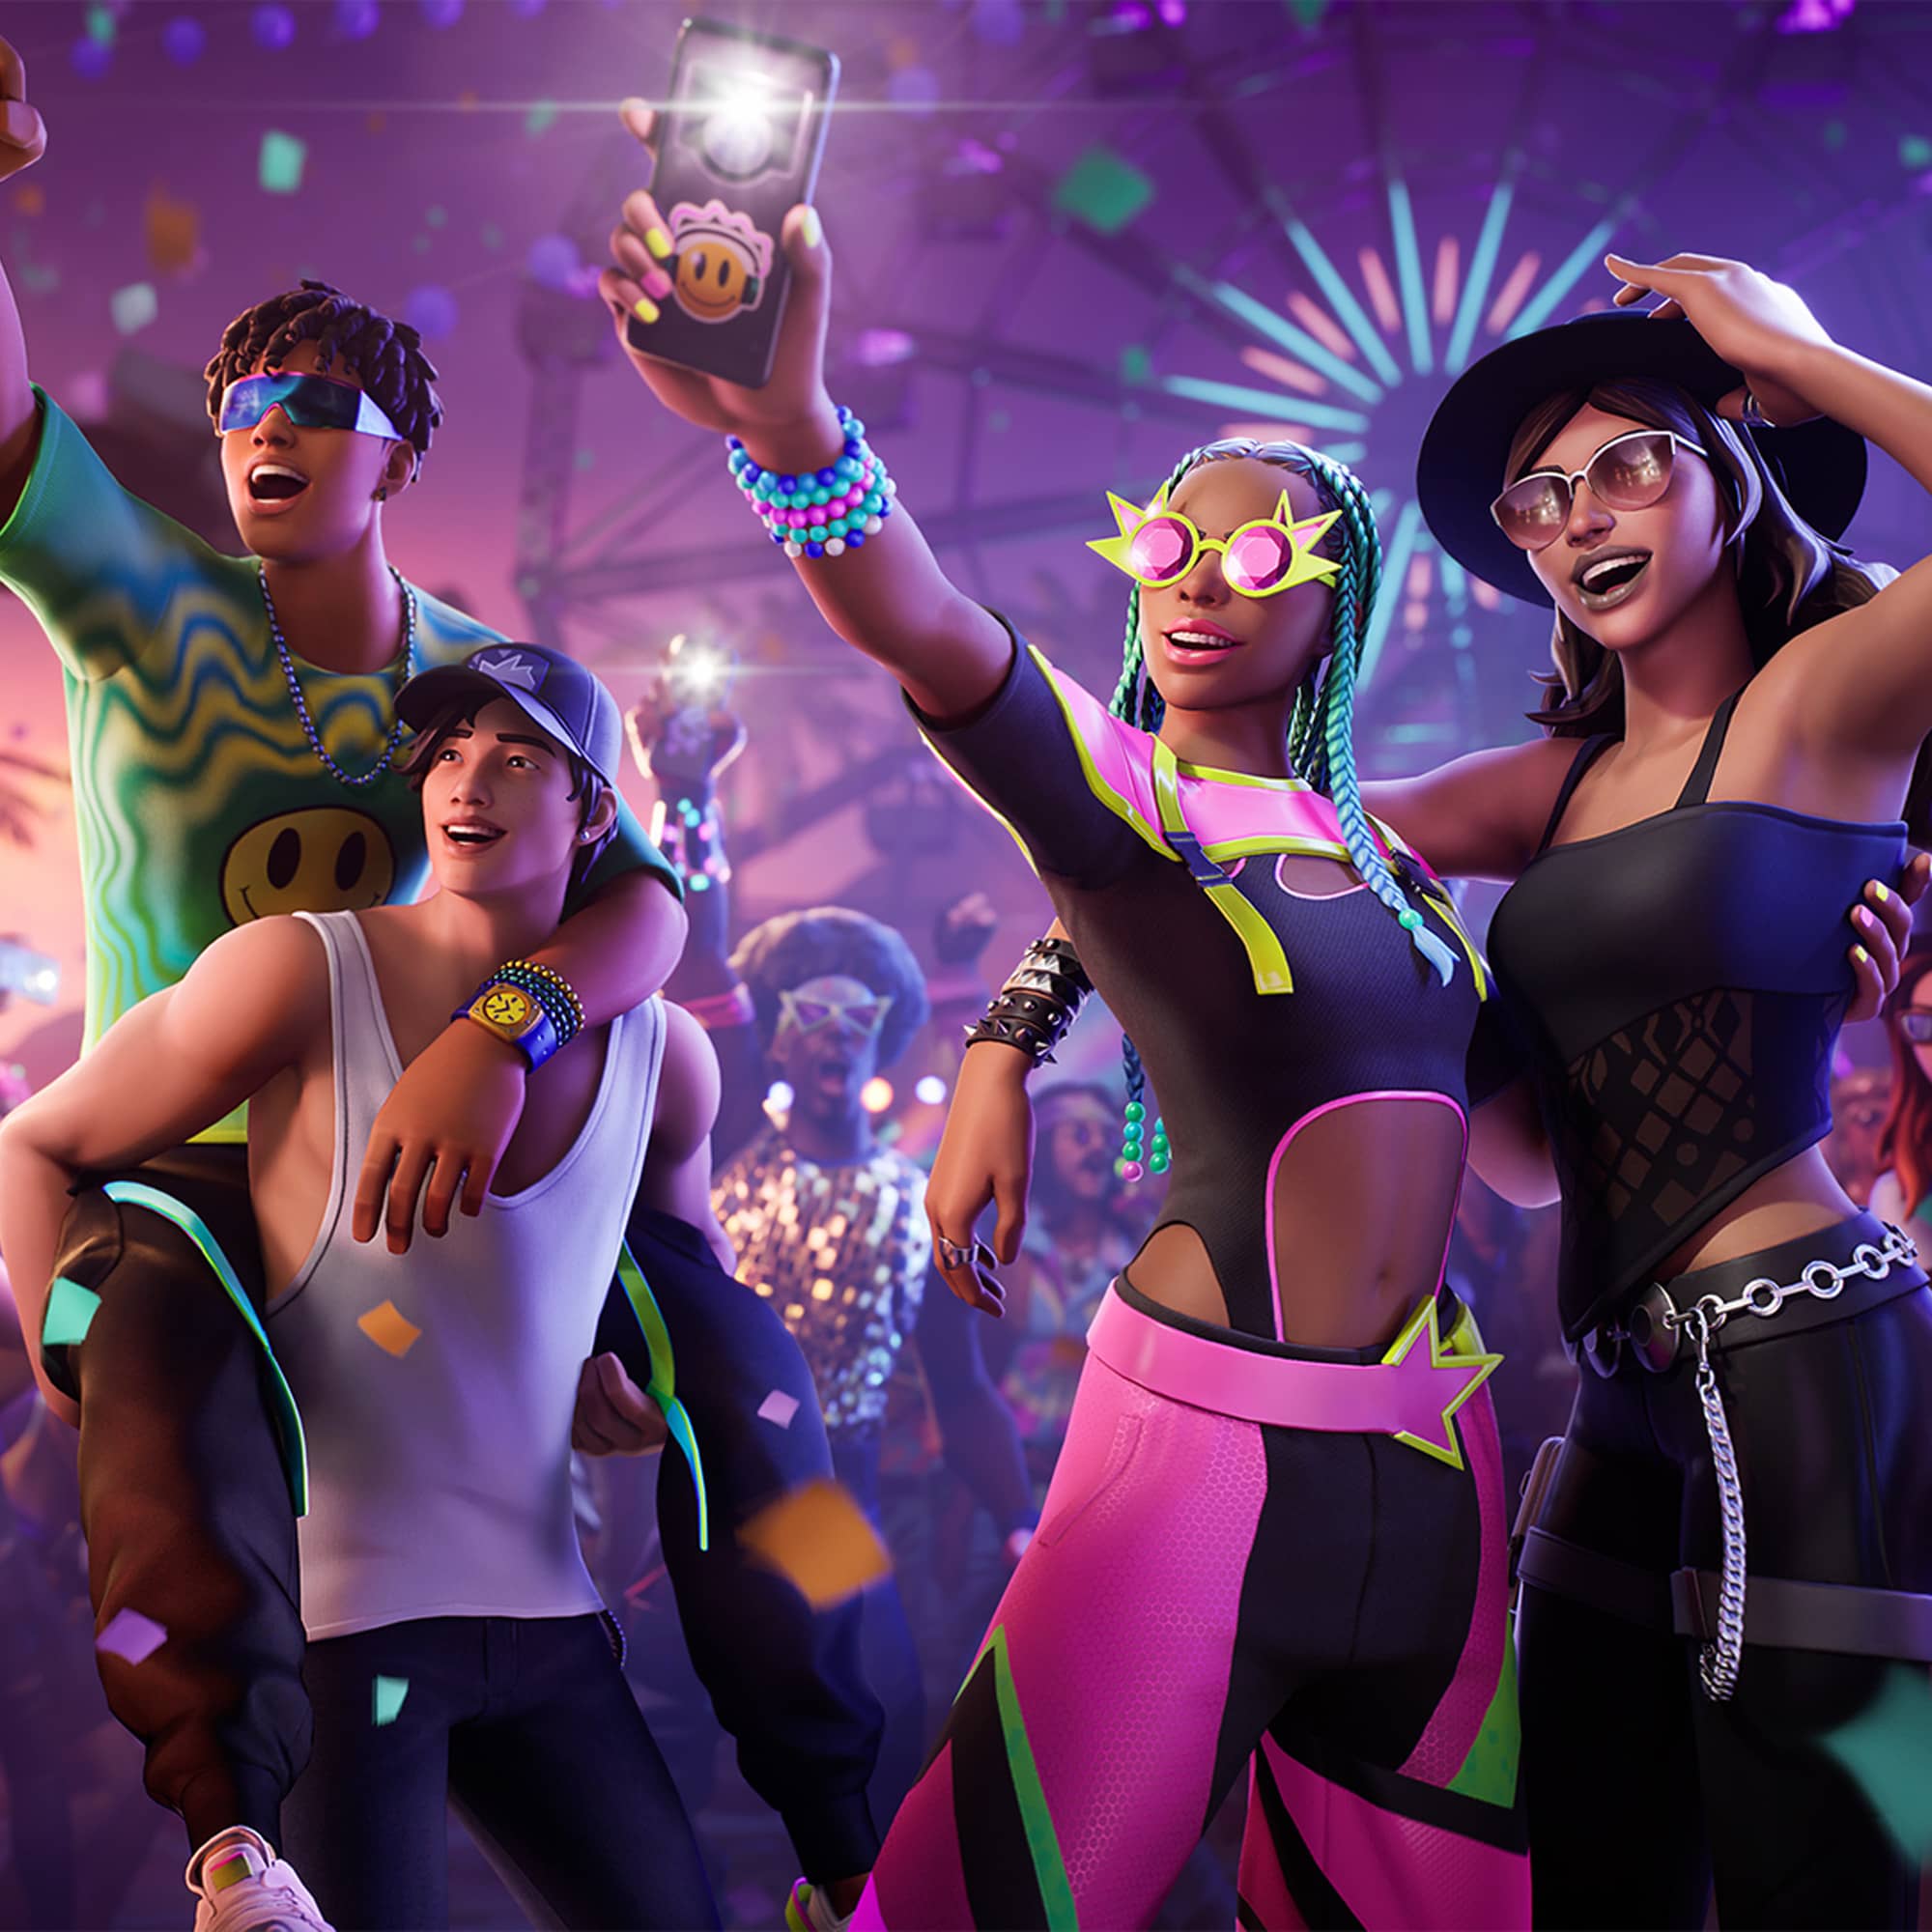 Artwork of the Alto, Wilder, Poet and Lyric Outfits from the Rocking at Coachella and Dancing at Coachella Bundles in Fortnite.